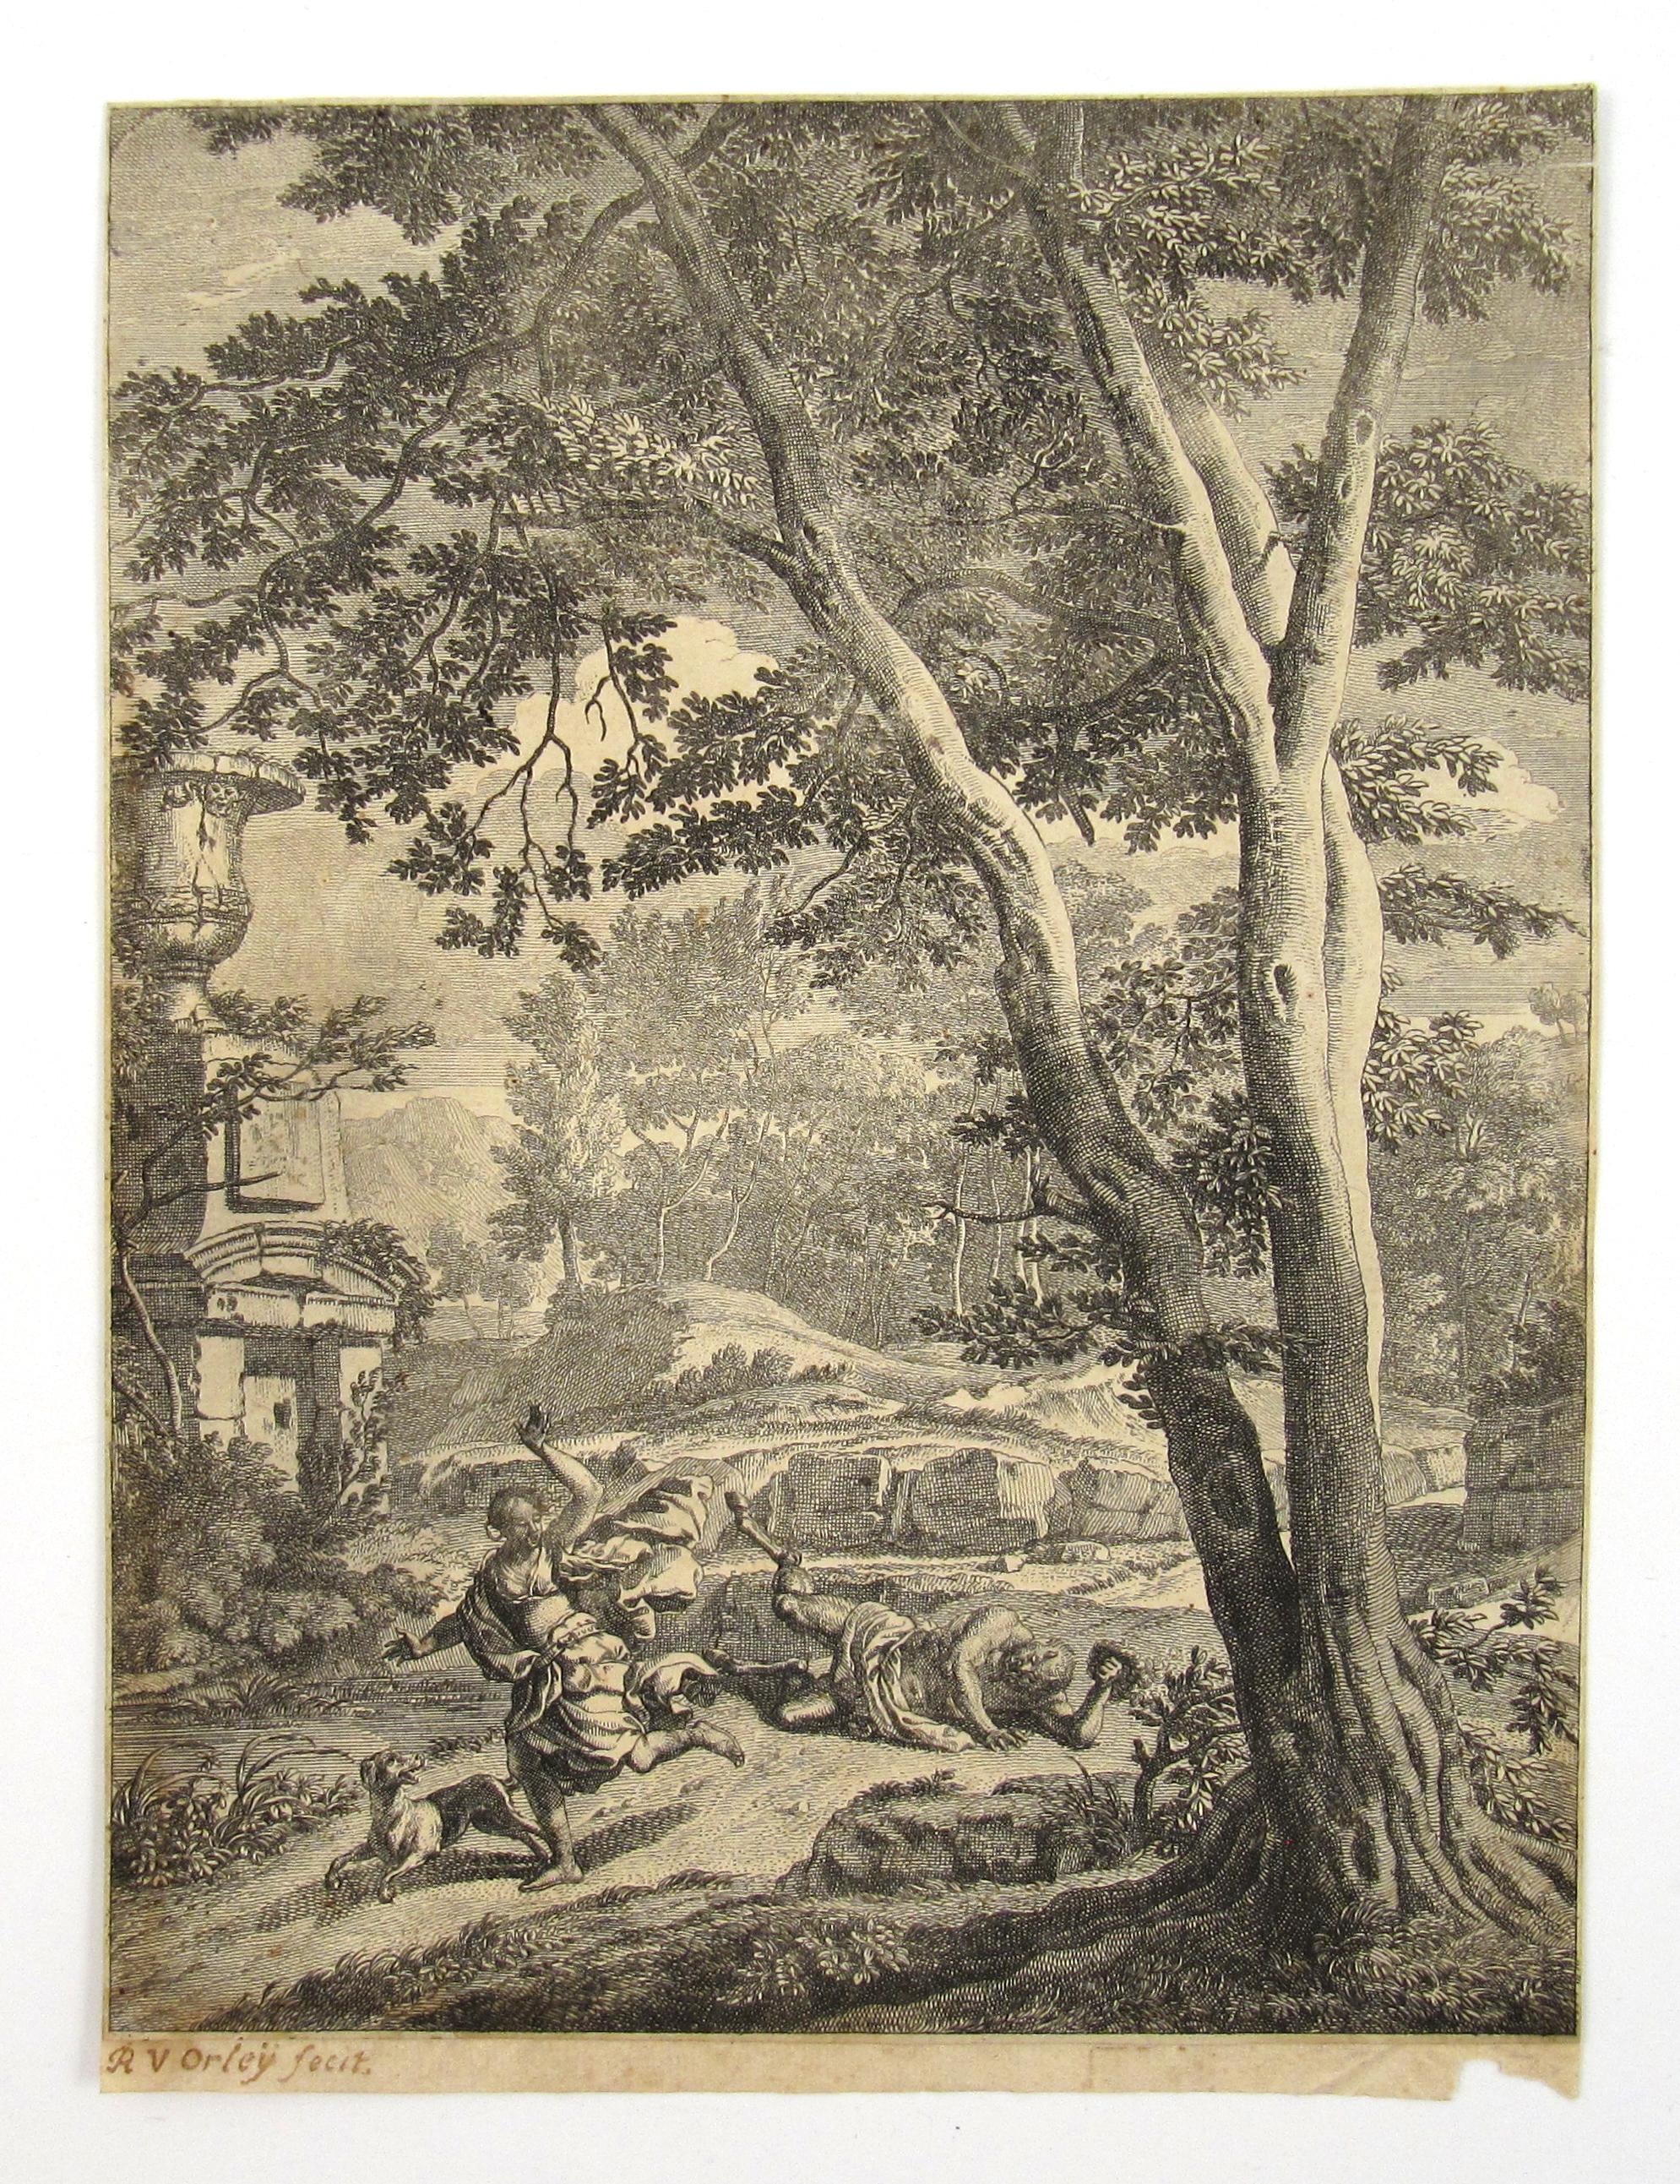 Corsica on the Run from the lustful Satyr - 17/18thC Engraving - Il pastor fido - Print by Richard van Orley (II)